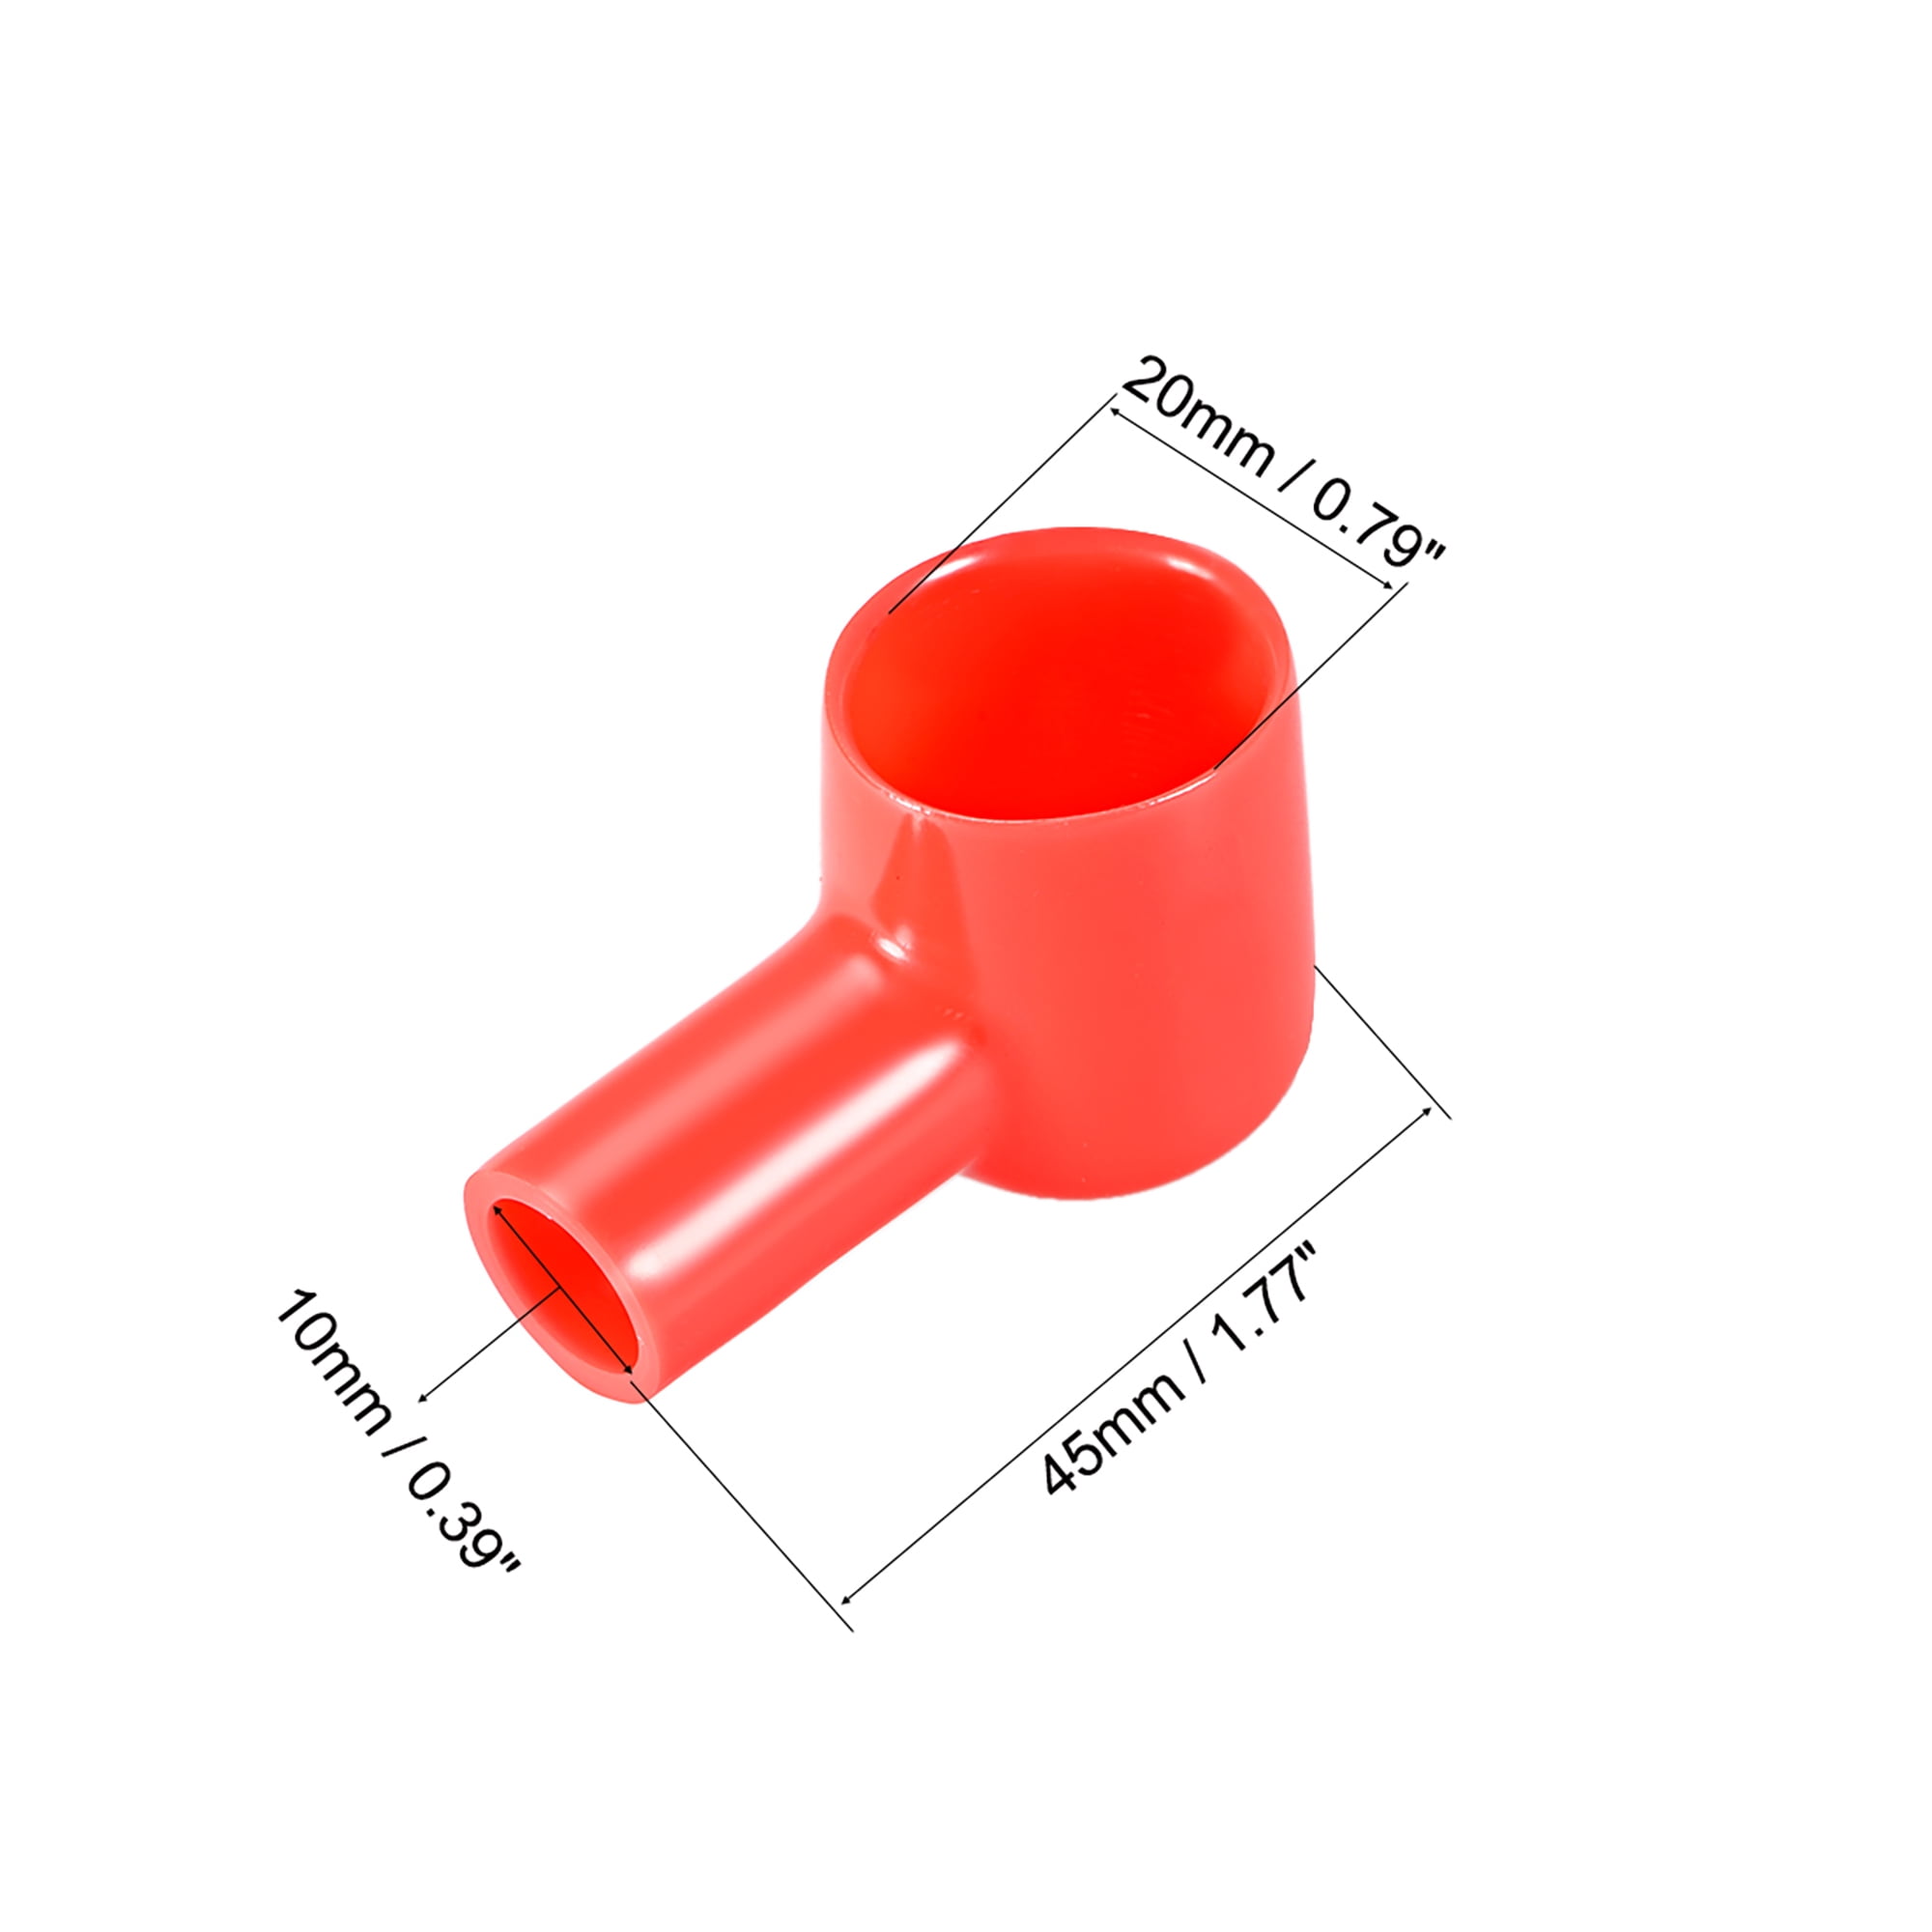 Details about   Battery Terminal Insulating Rubber Protector Covers 28mmx8mm Red Black 2 Pairs 